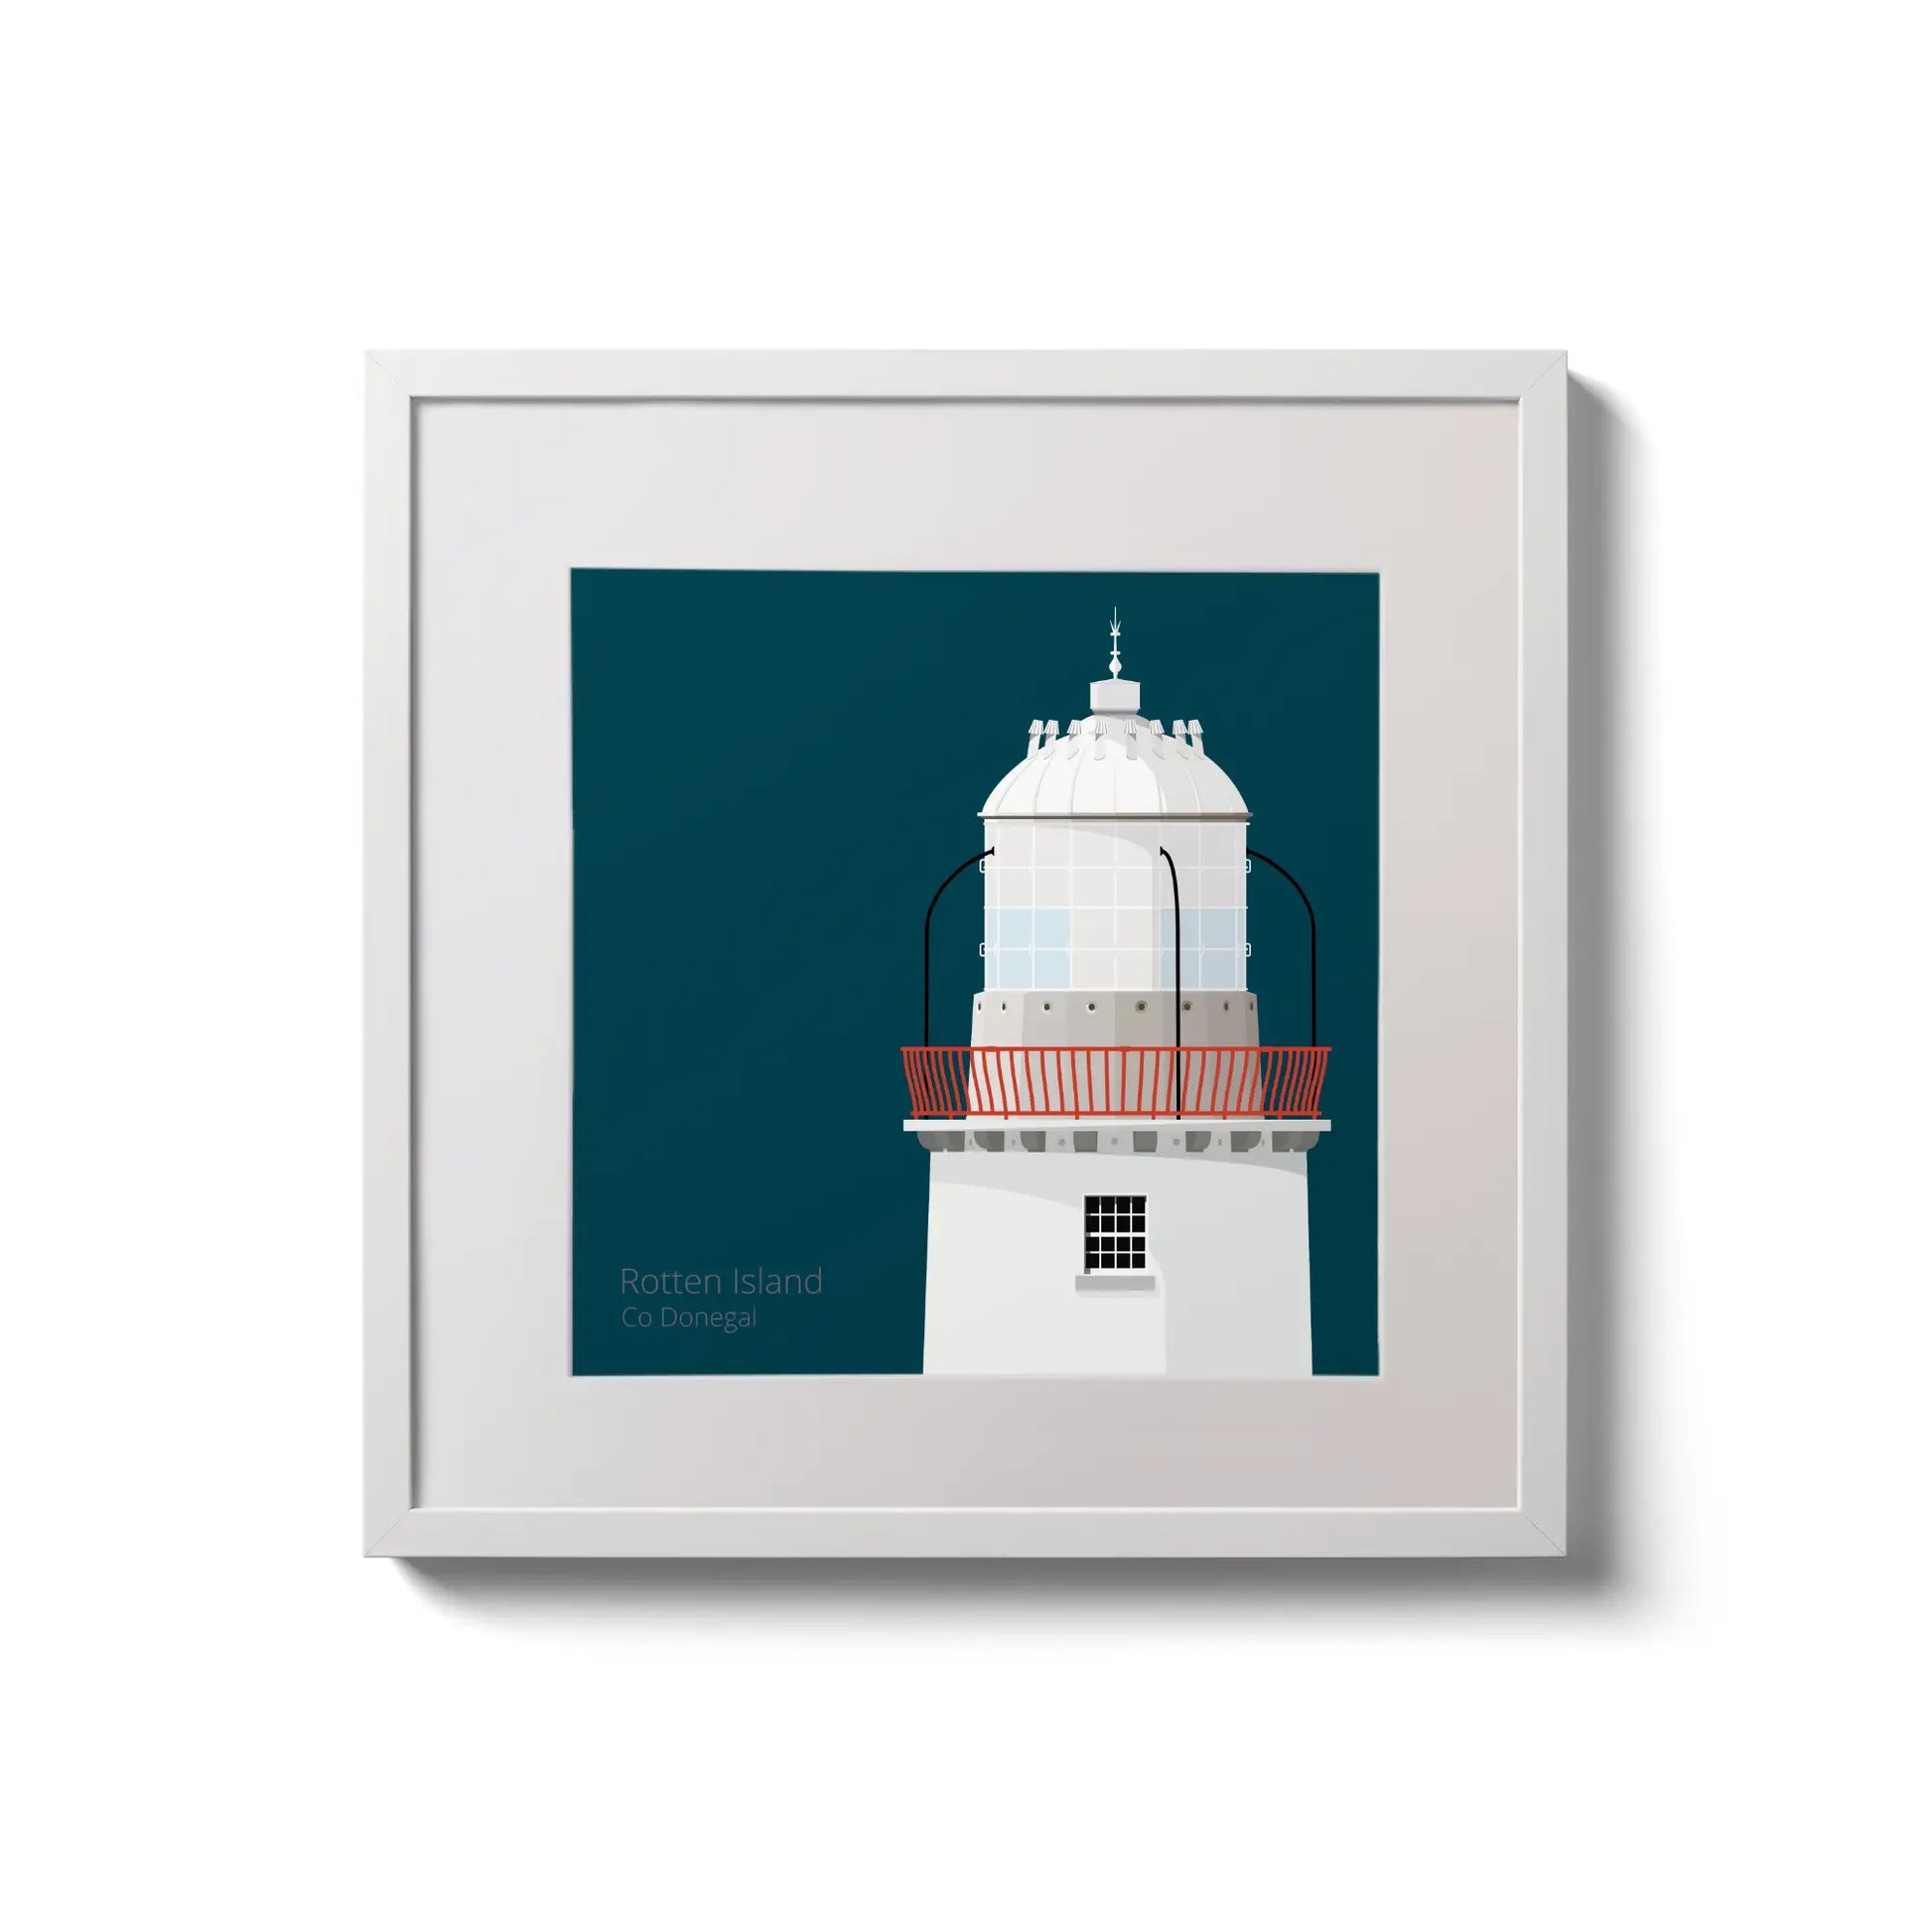 Framed wall art decoration Rotten Island lighthouse on a midnight blue background,  in a white square frame measuring 20x20cm.